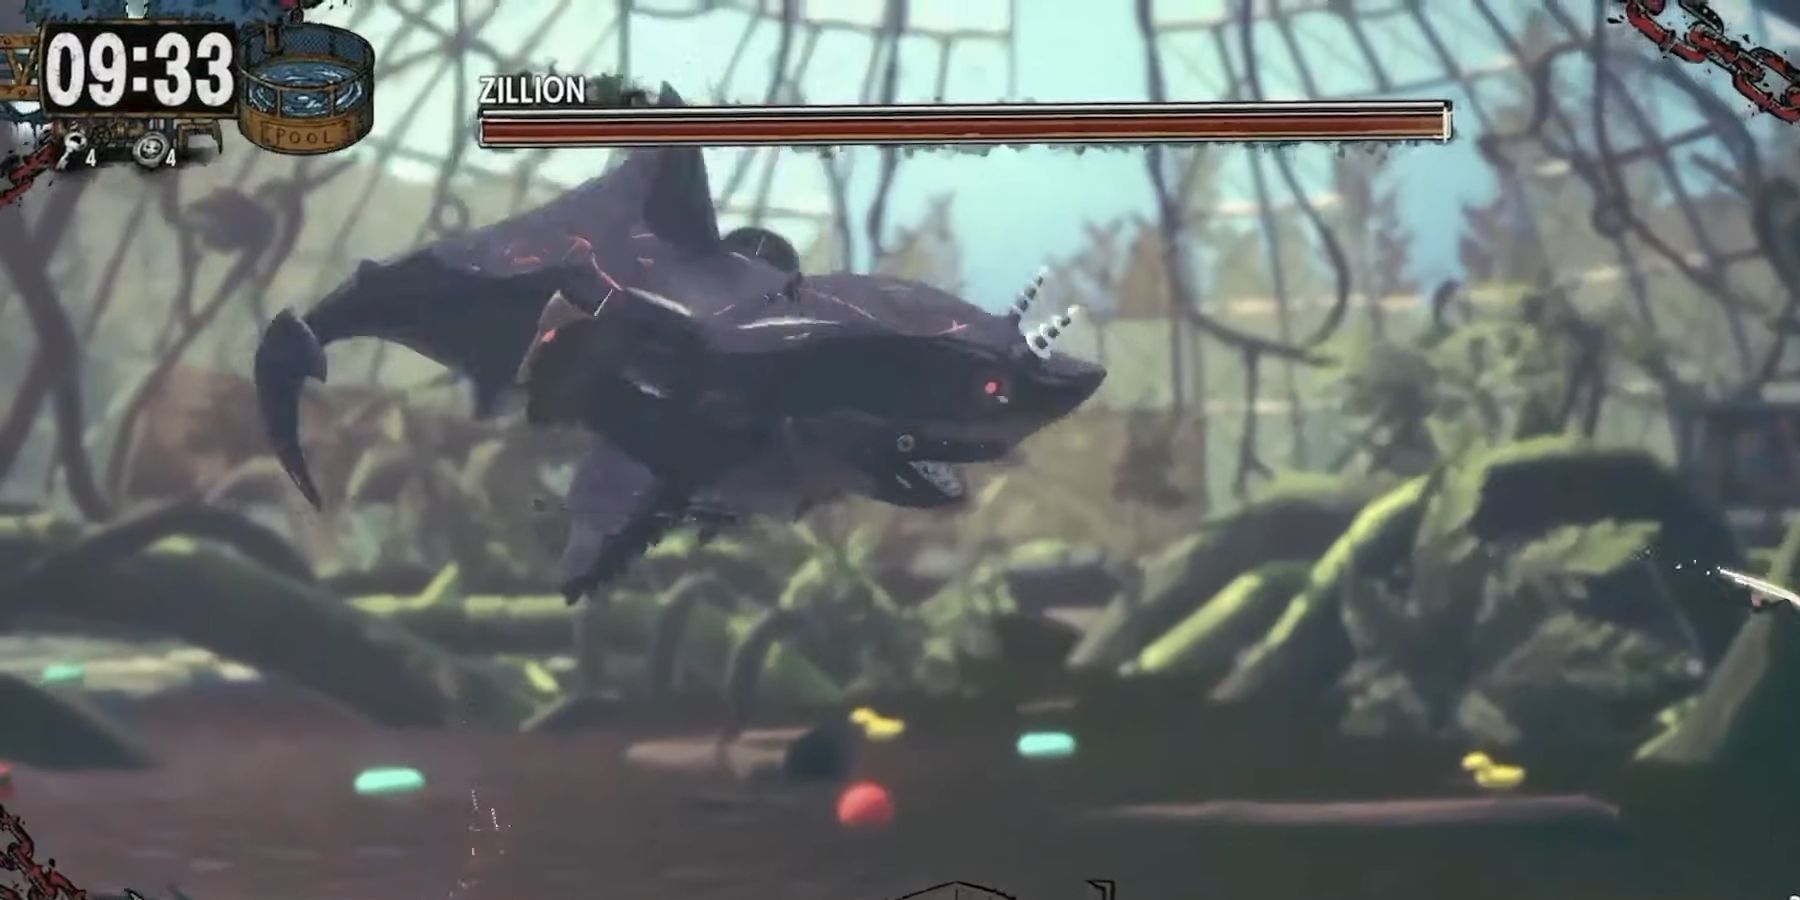 Zillion, the giant mechanical shark, flips through the air in a screenshot from Hotel Barcelona.